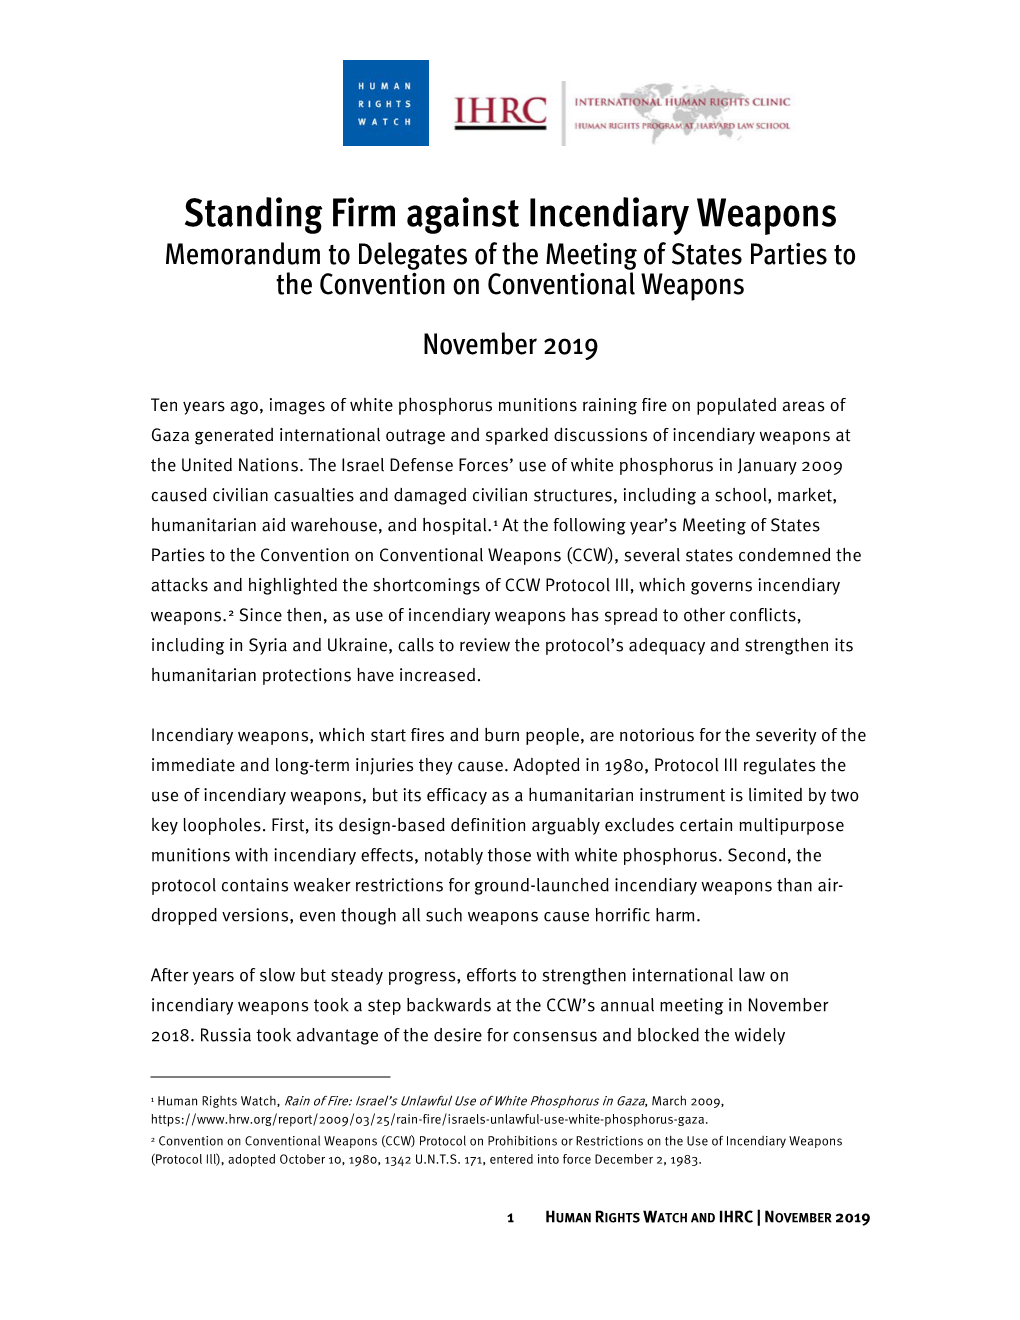 Standing Firm Against Incendiary Weapons Memorandum to Delegates of the Meeting of States Parties to the Convention on Conventional Weapons